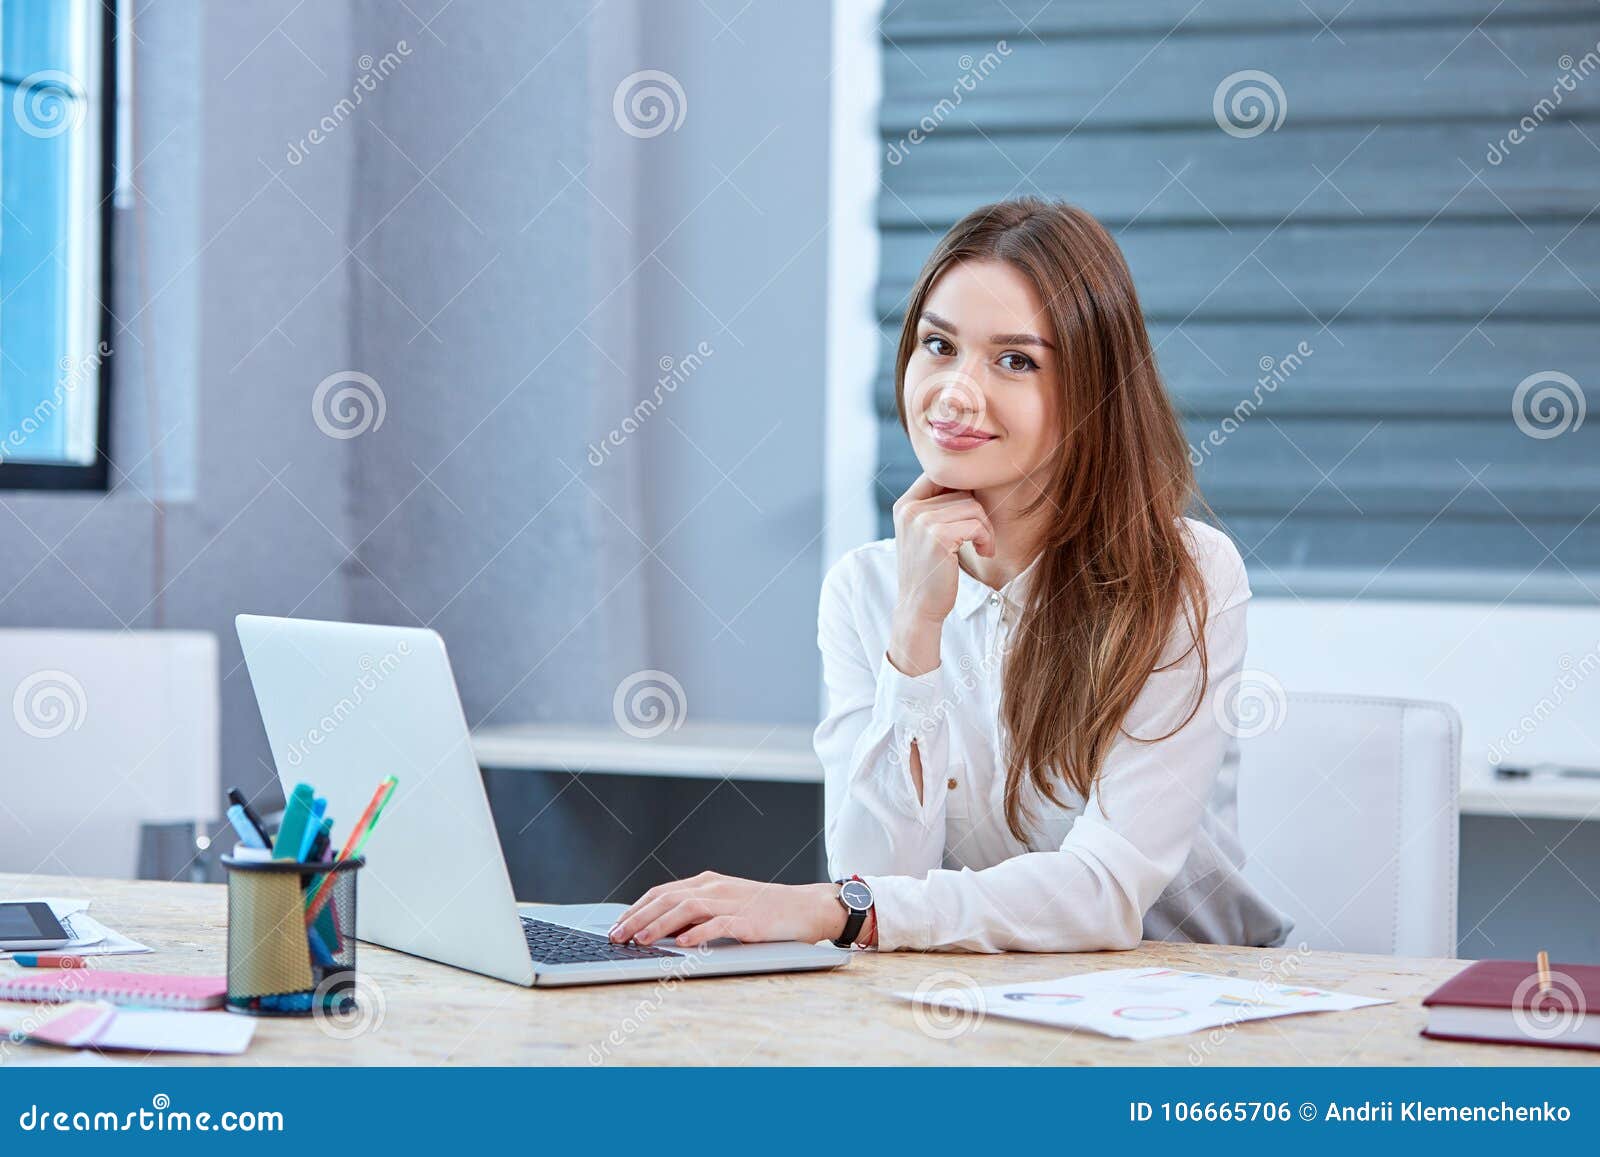 A Girl Office Worker, Sitting at Table with Laptop and Smiling. Stock Photo  - Image of corporate, businessman: 106665706